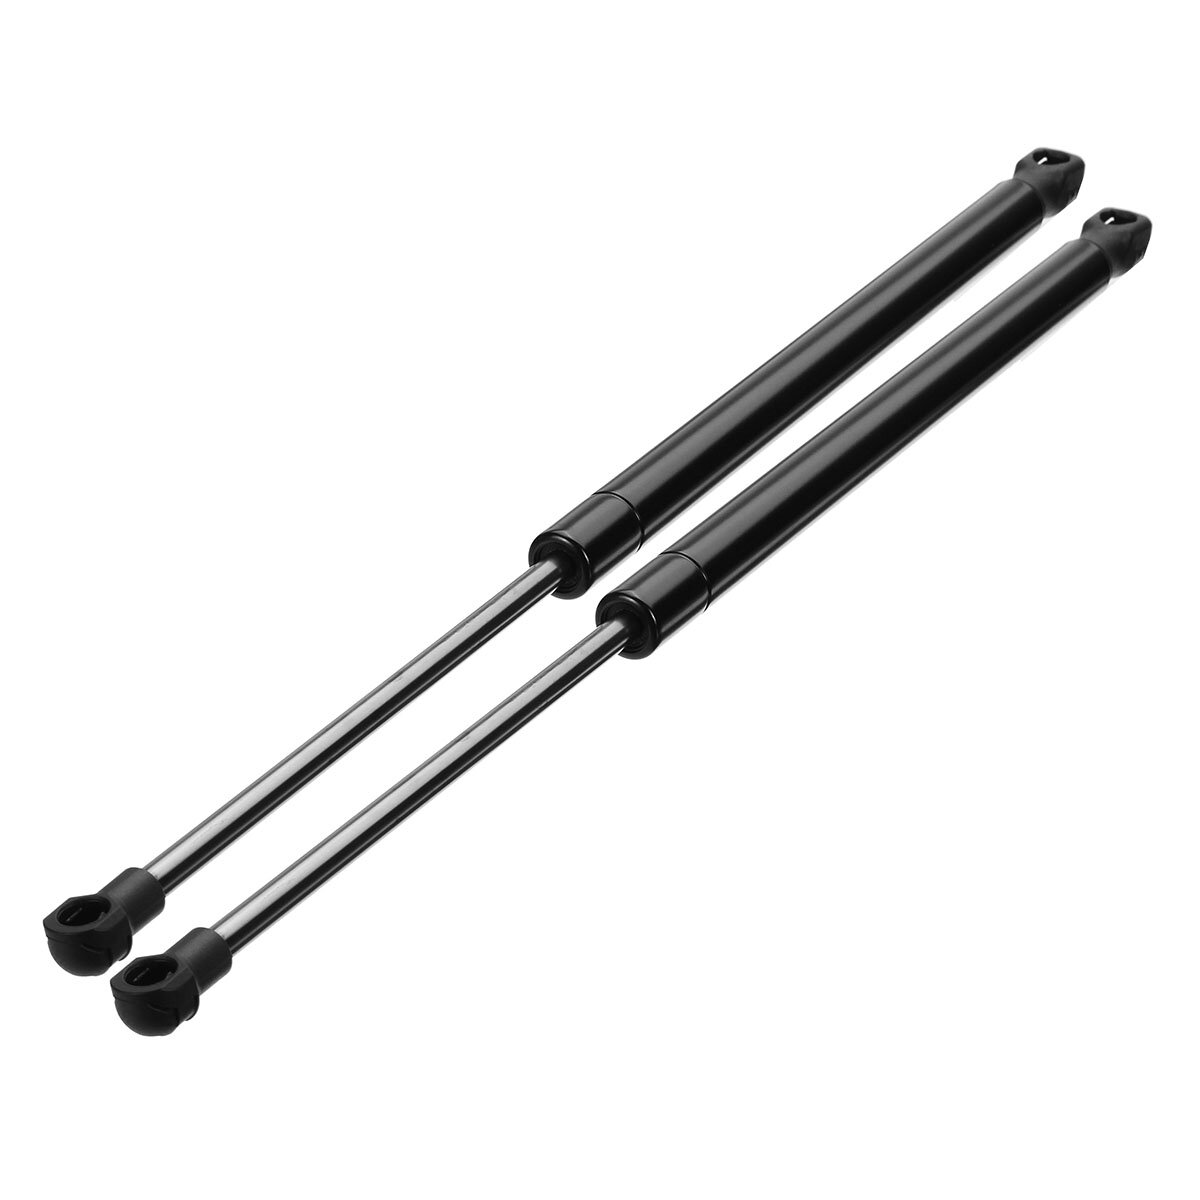 2pcs Auto Rear Tailgate Boot Gas Spring Struts Prop Lift Support Damper for HYUNDAI i10 (PA) Hatchba